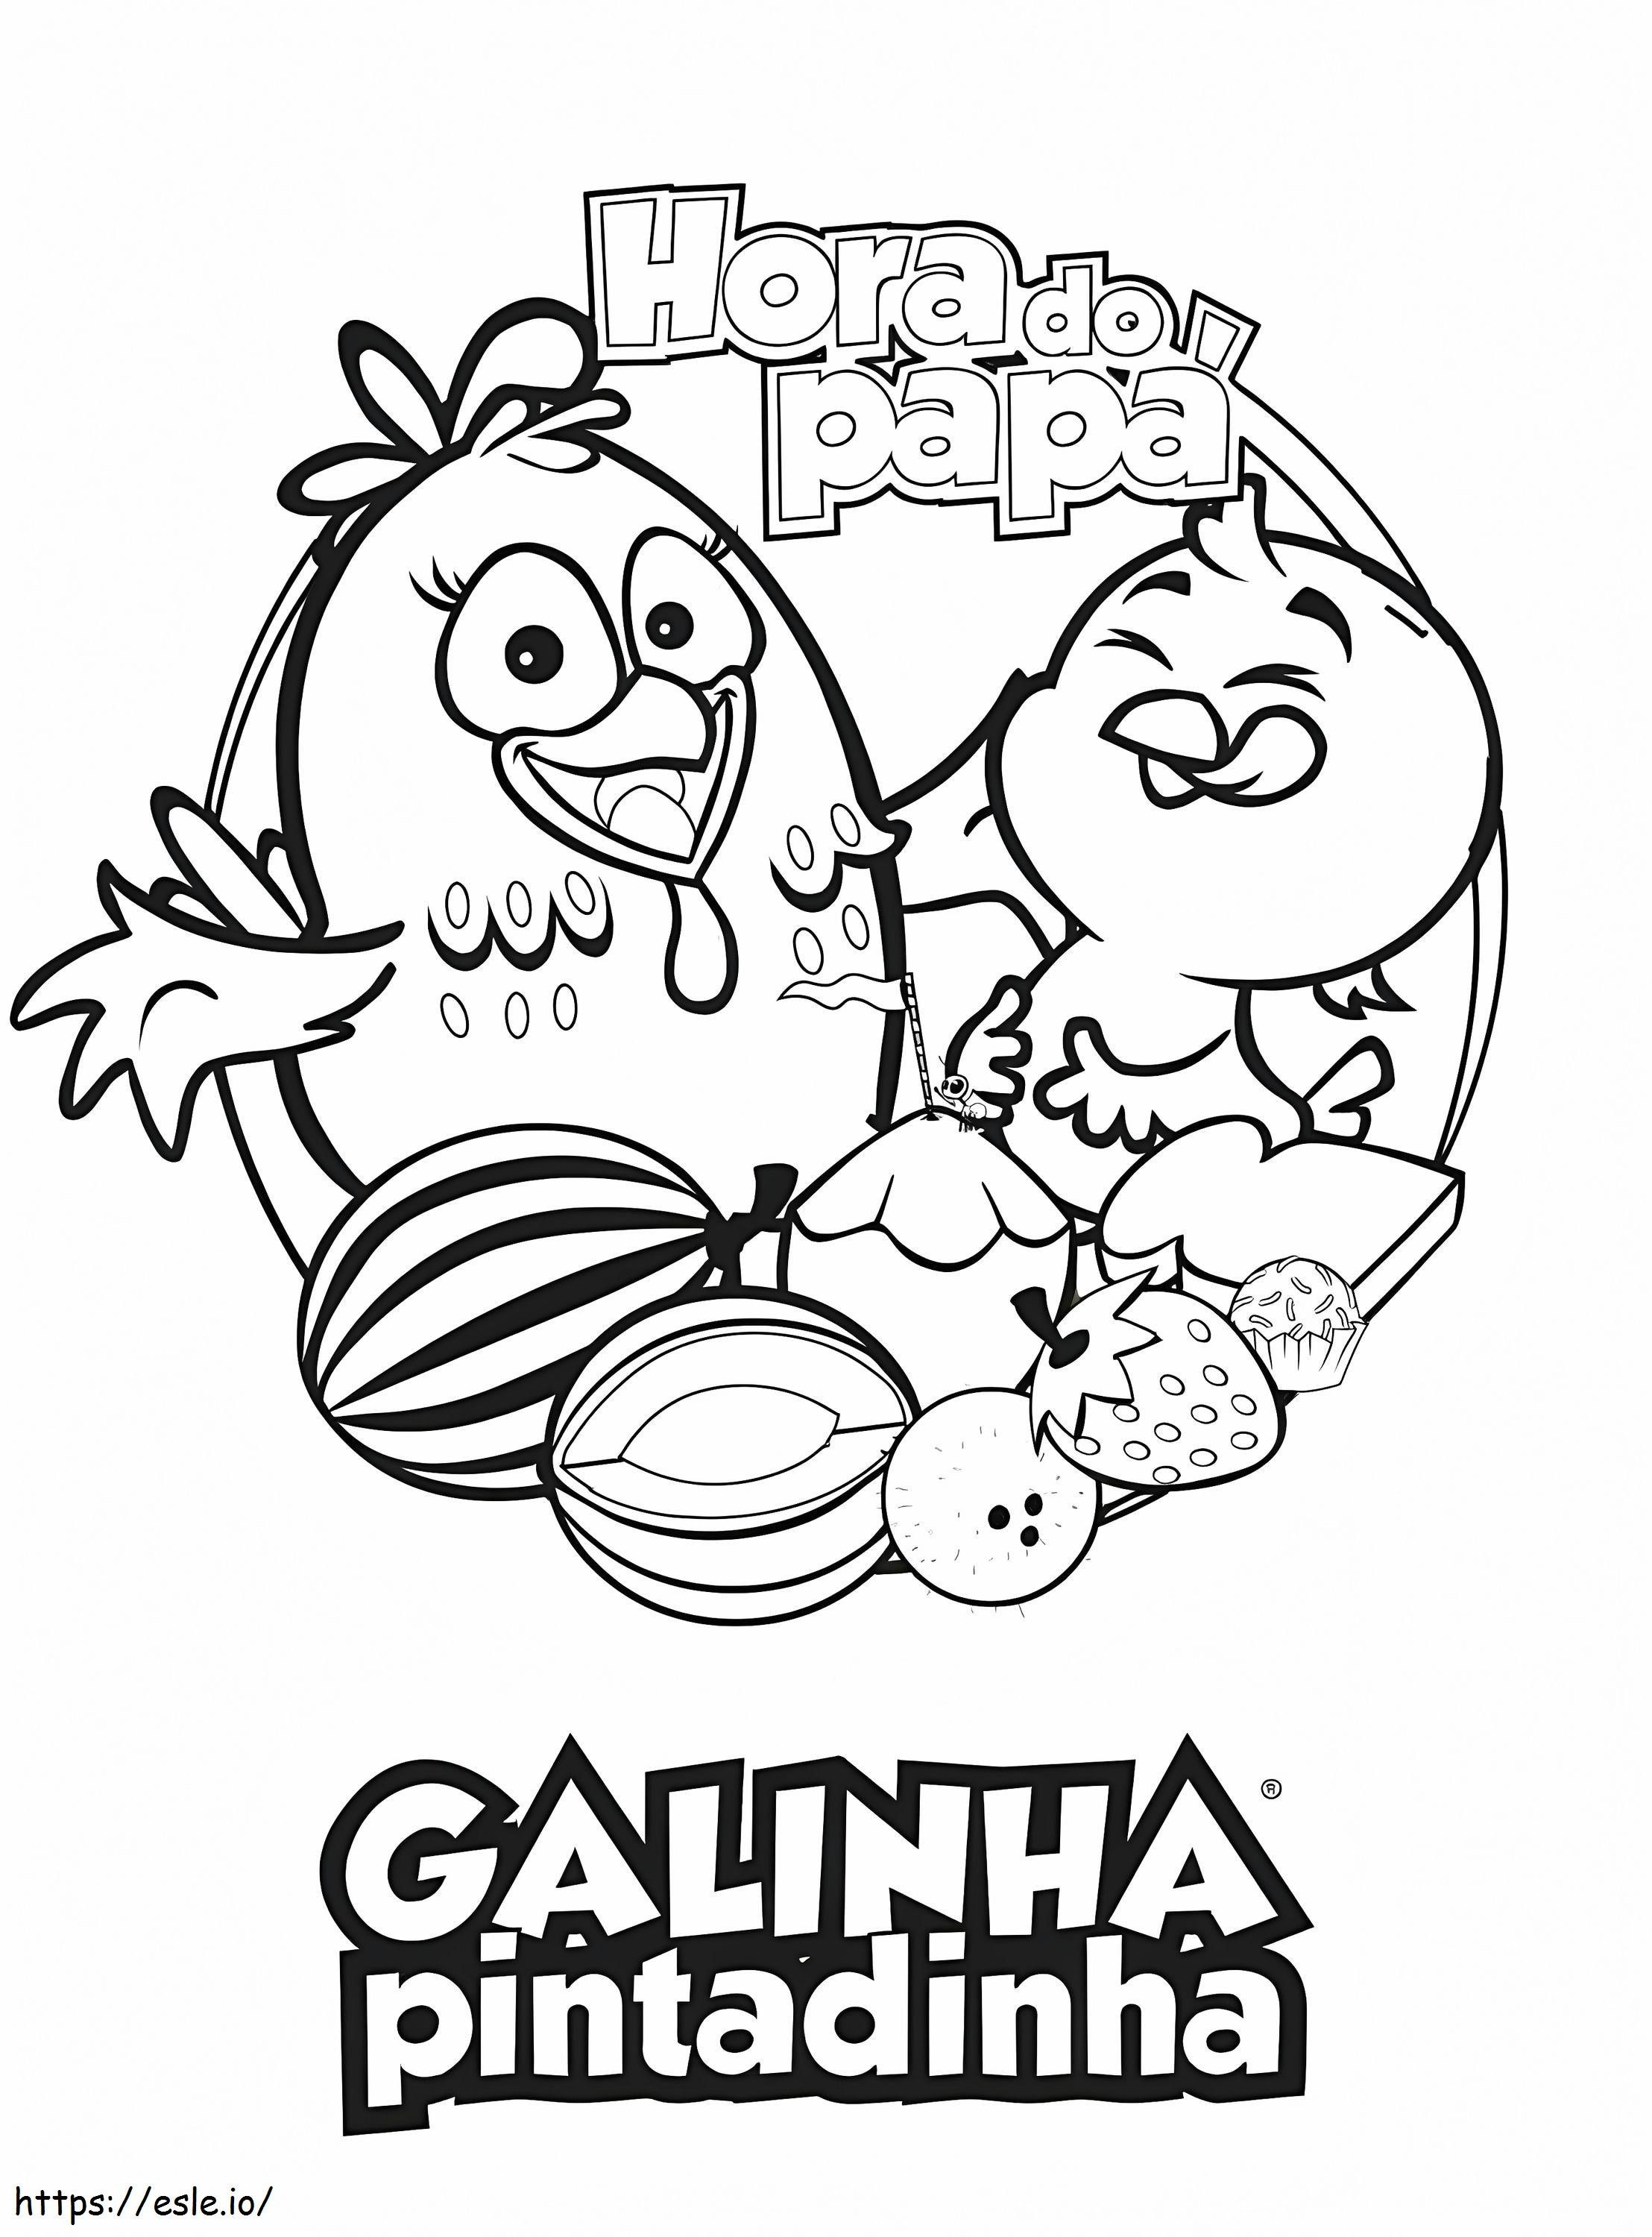 Pintadinha Chicken 7 coloring page